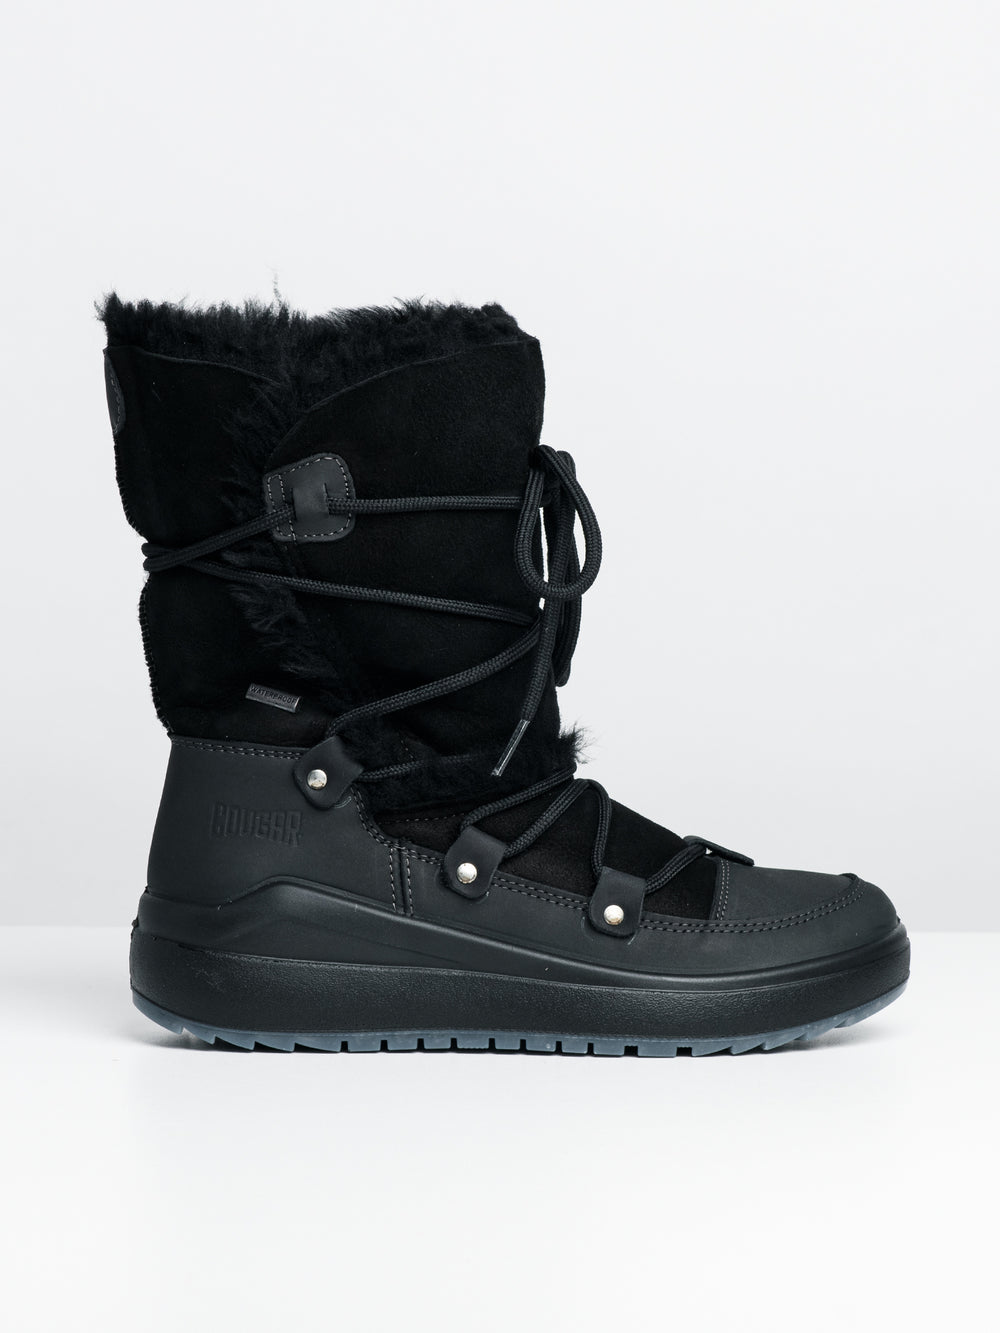 WOMENS COUGAR TACOMA BOOT - CLEARANCE